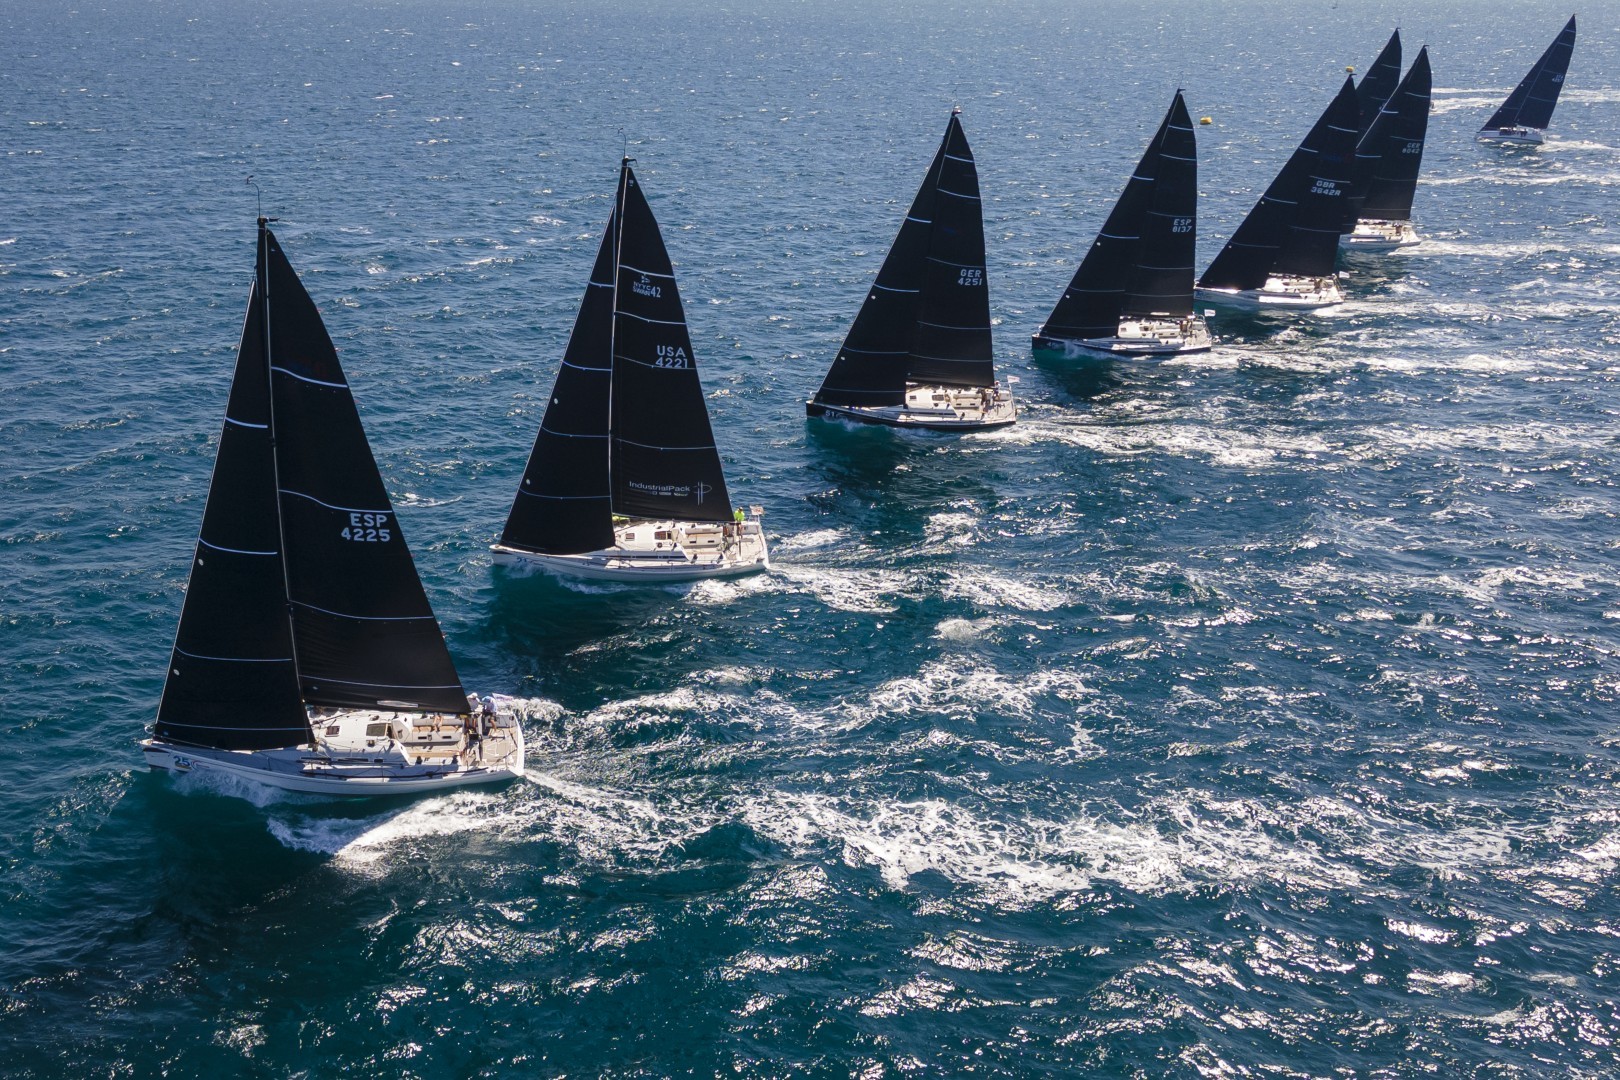 Teams stake their claims with Swan One Design Worlds set for dramatic final day